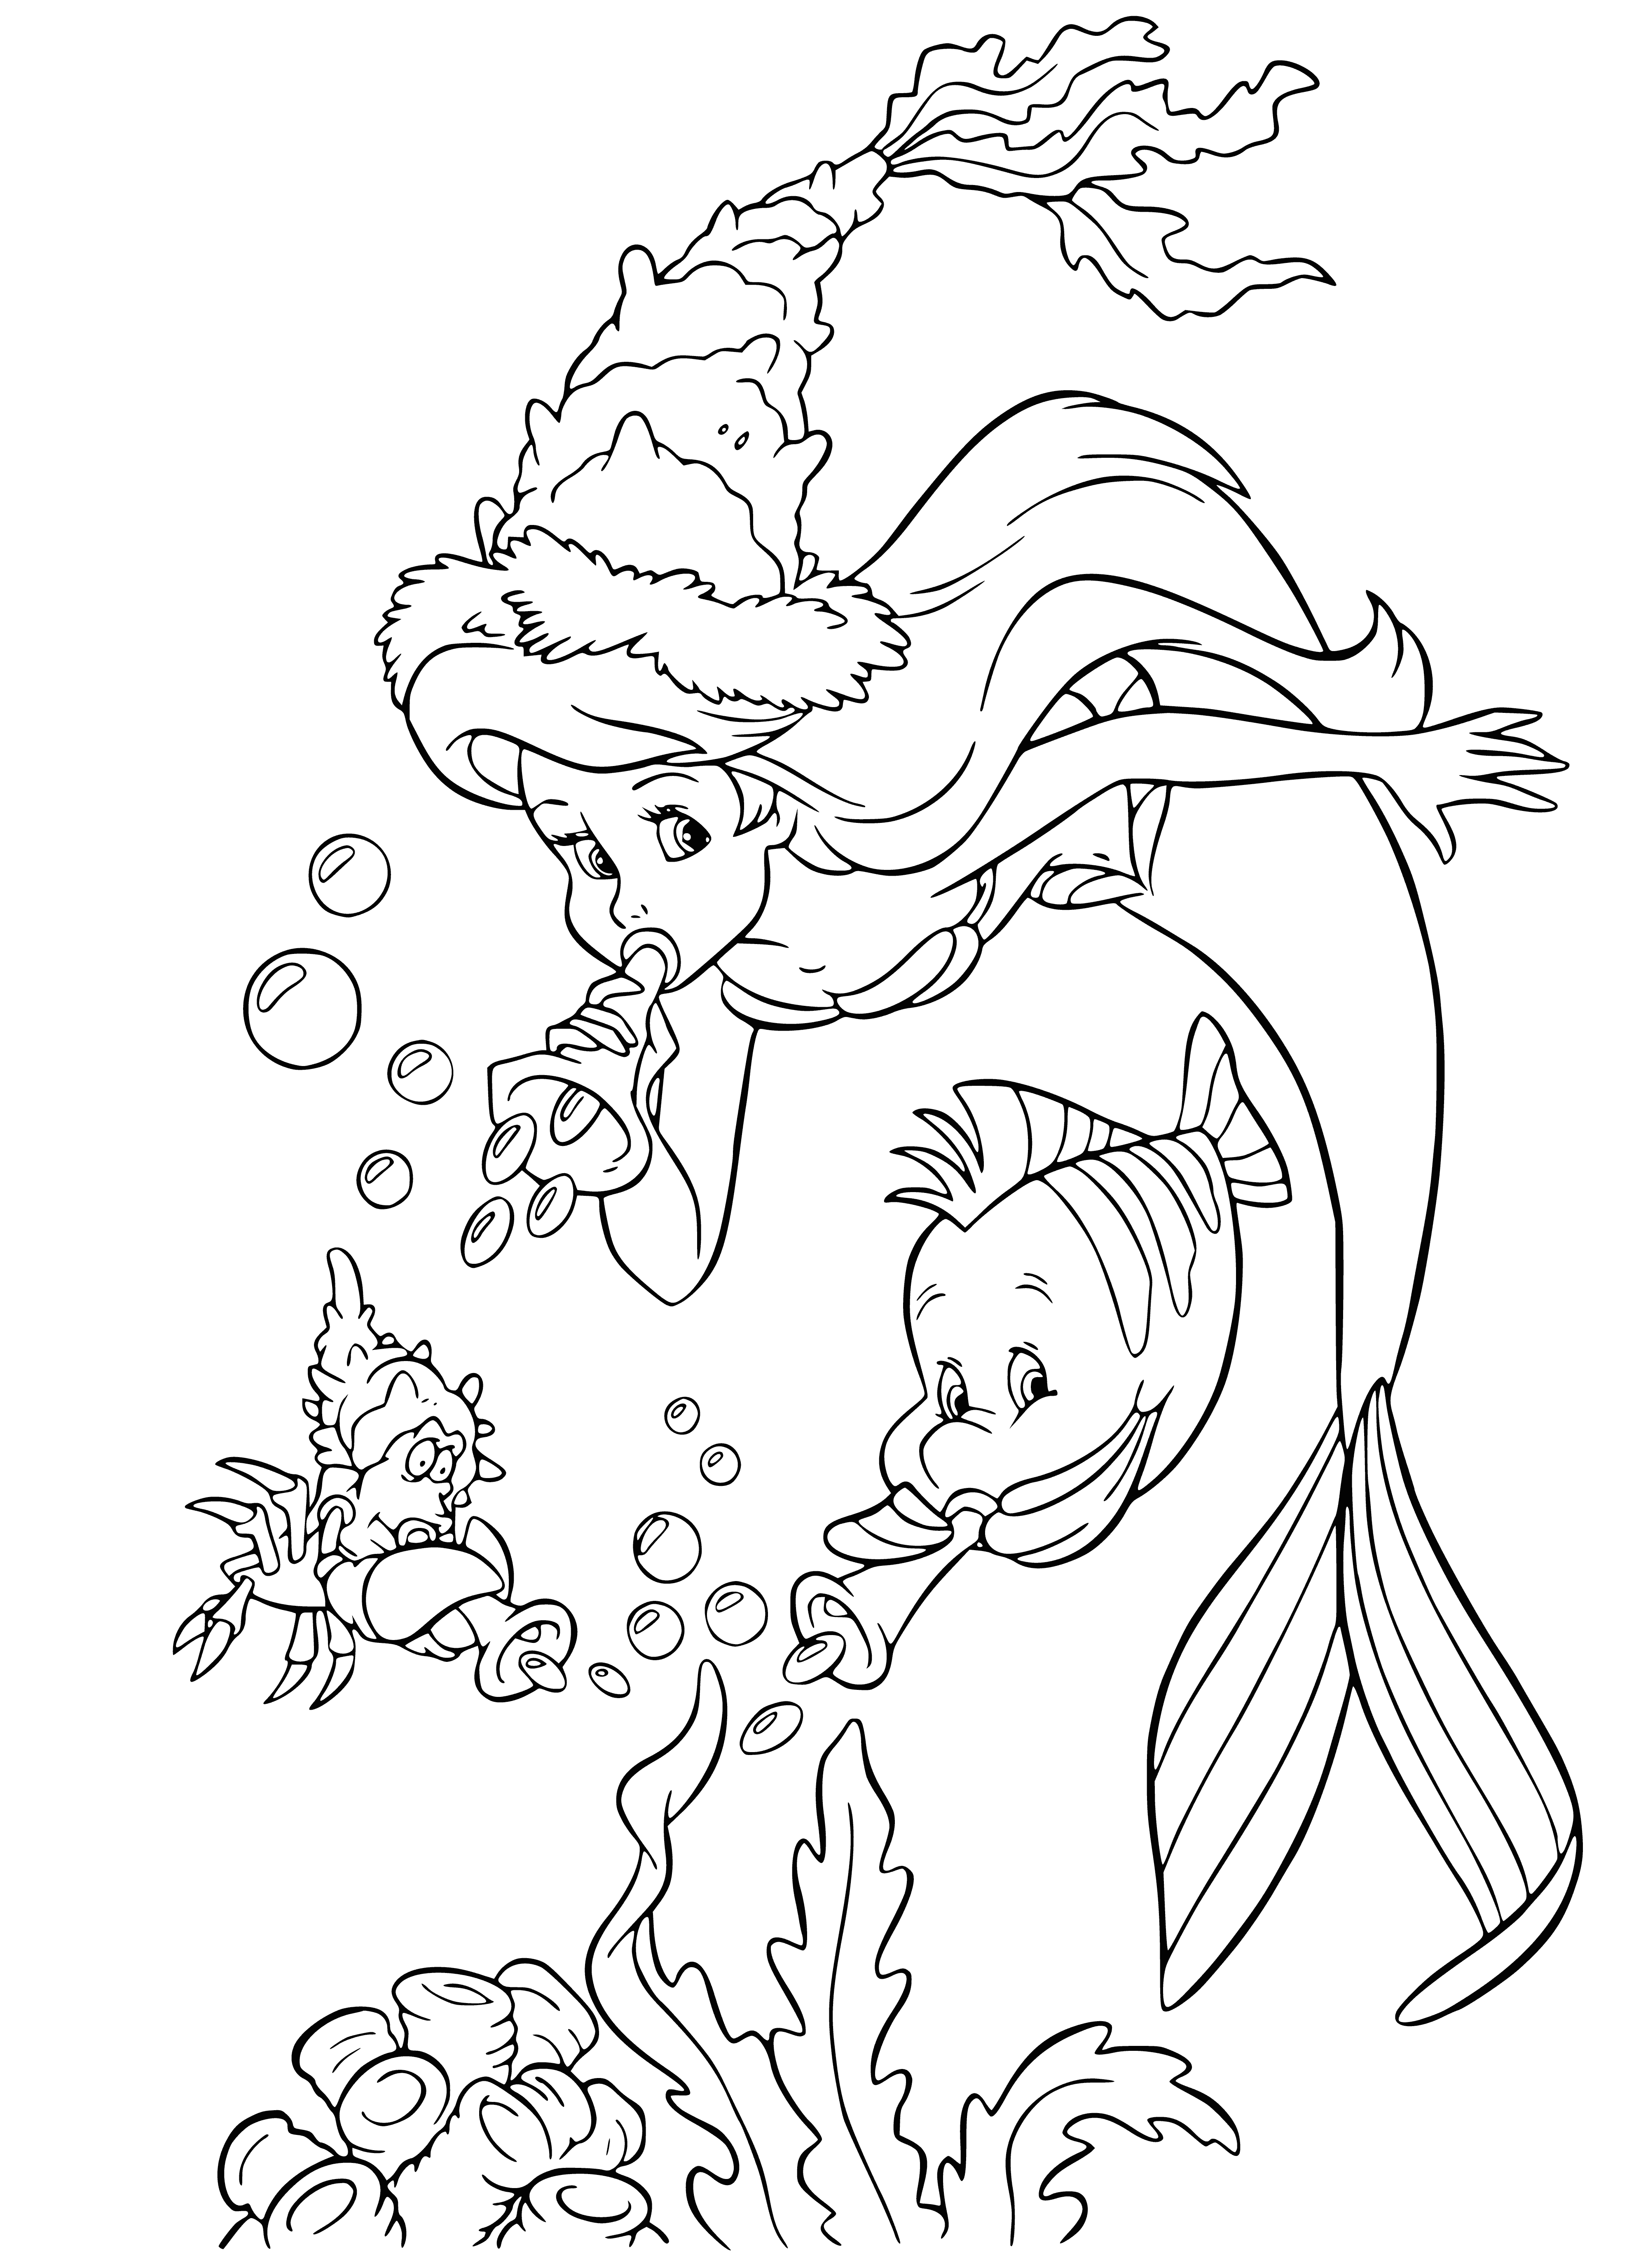 coloring page: Ariel is ringing in the New Year with friends, wearing a purple dress & tiara, cheering & holding champagne cups. #happynewyear